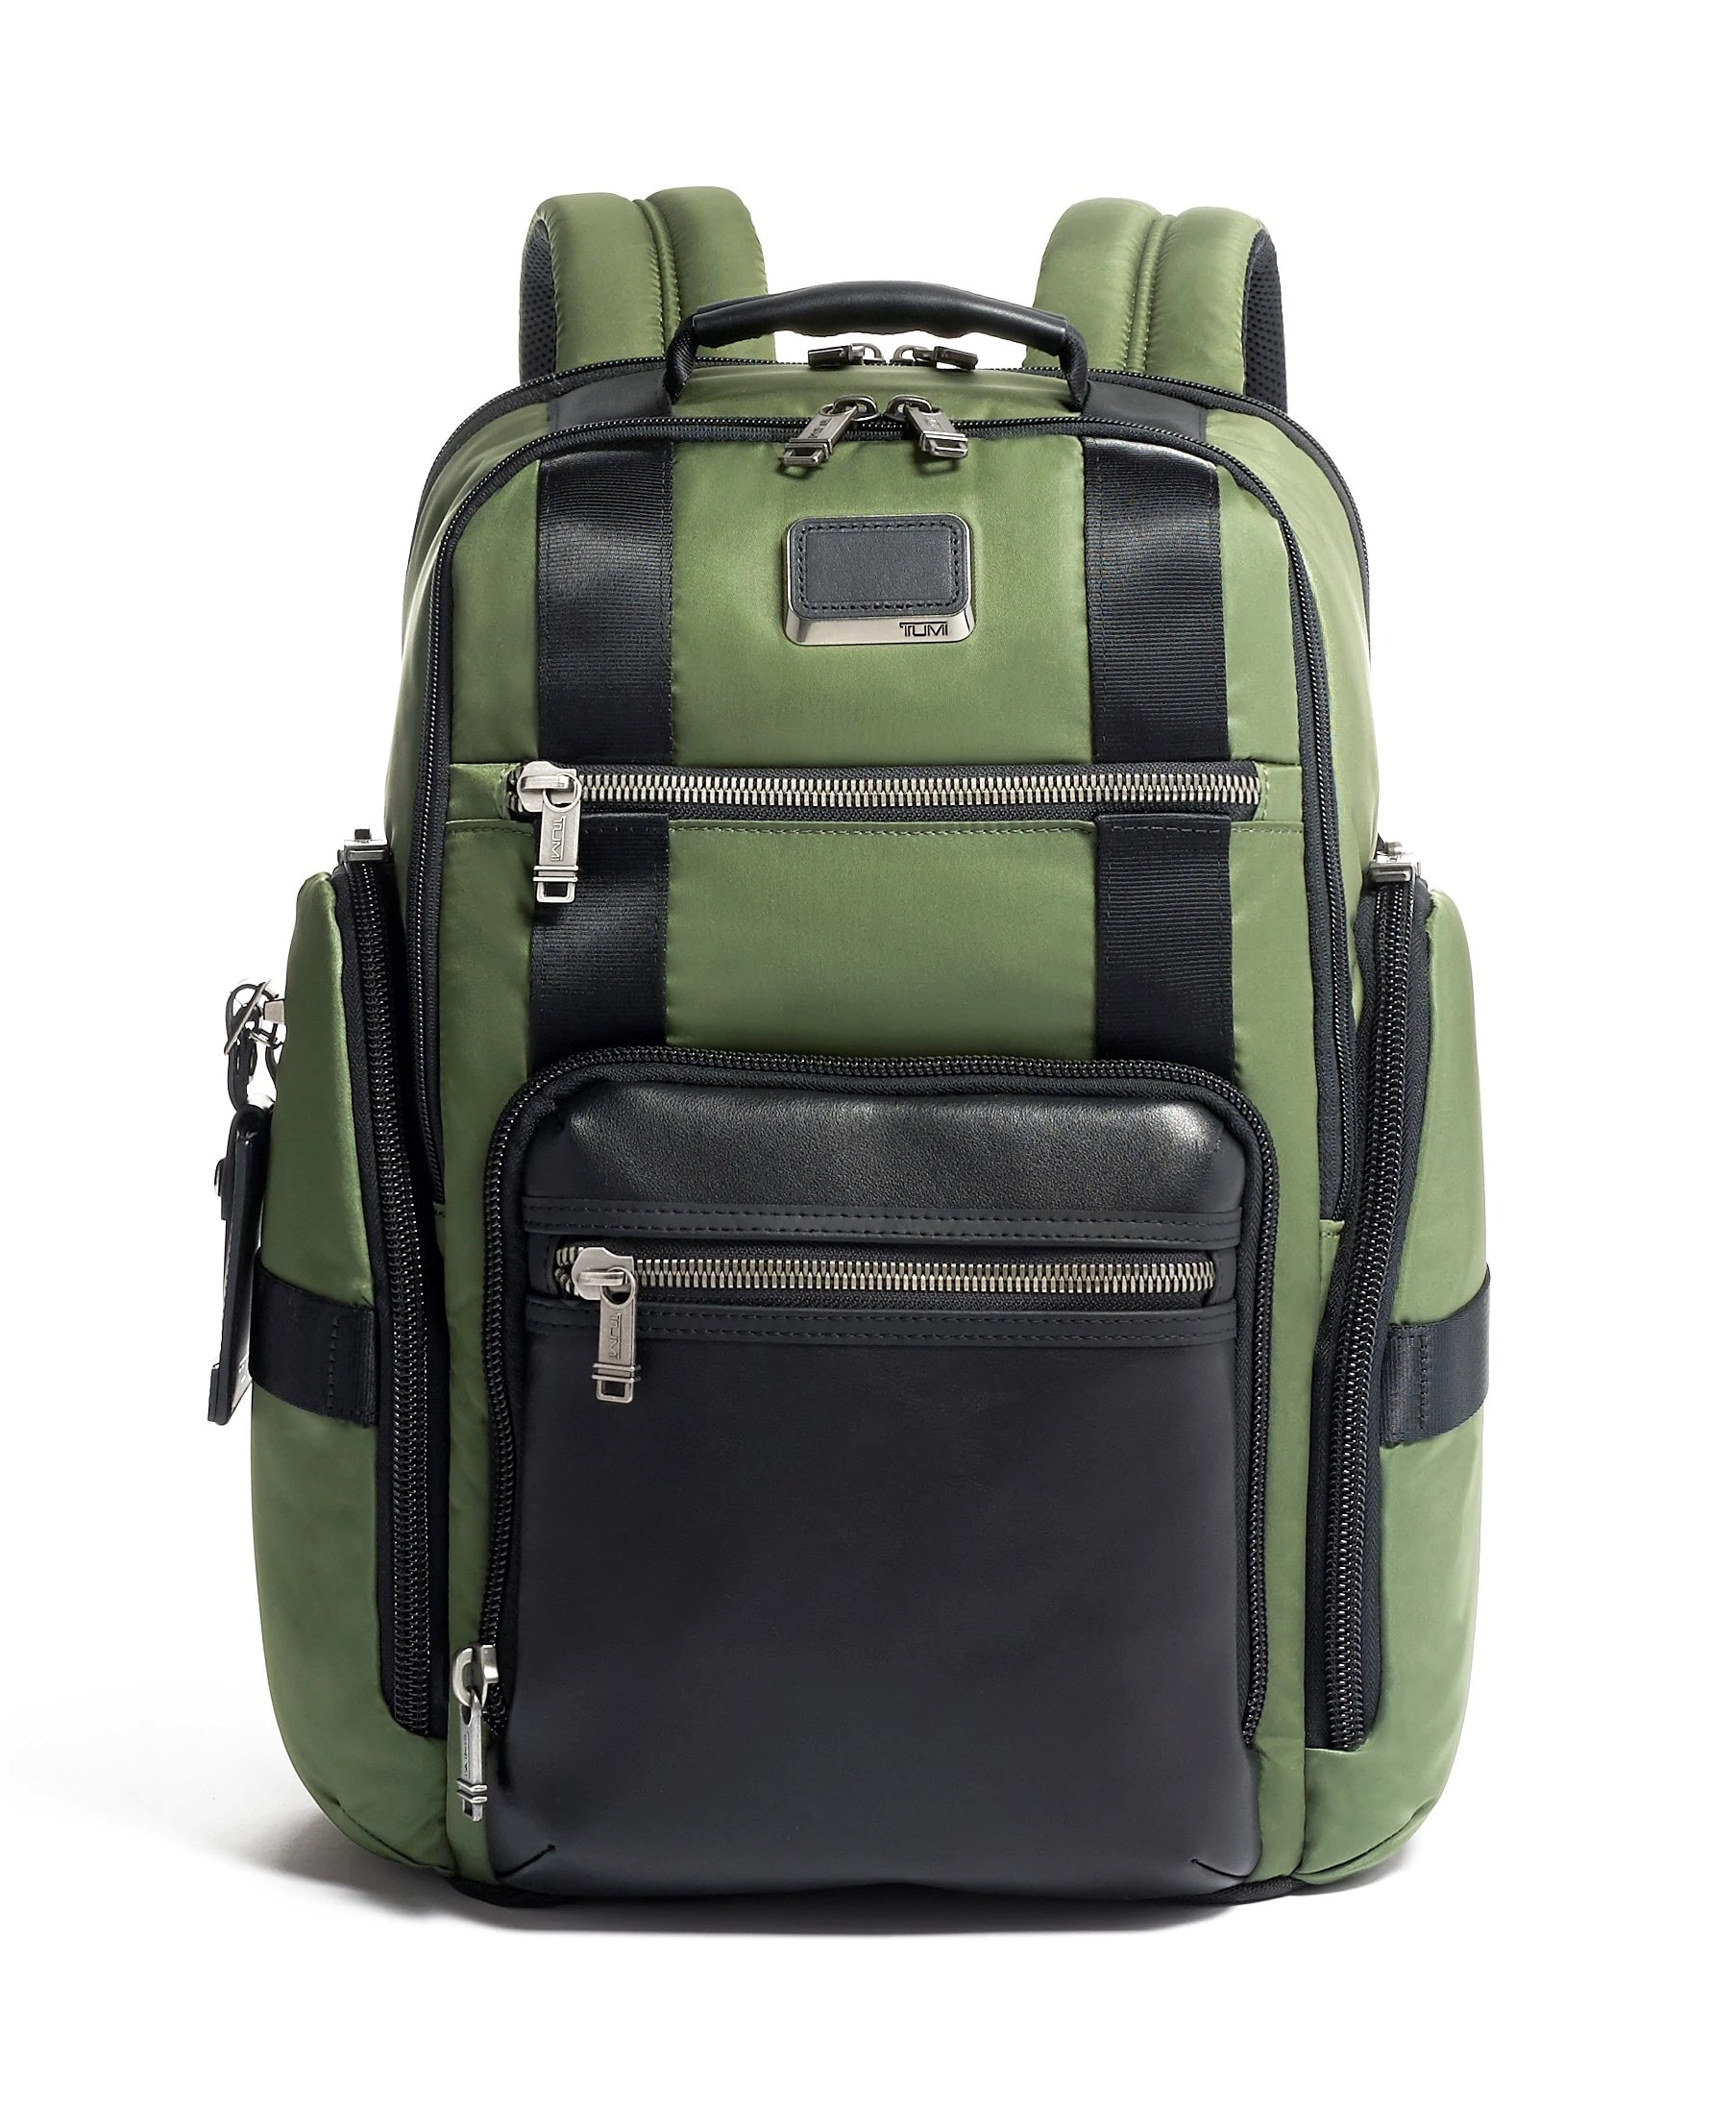 BALO TUMI SHEPPARD DELUXE BRIEF PACK ALPHA BRAVO BACKPACK 20